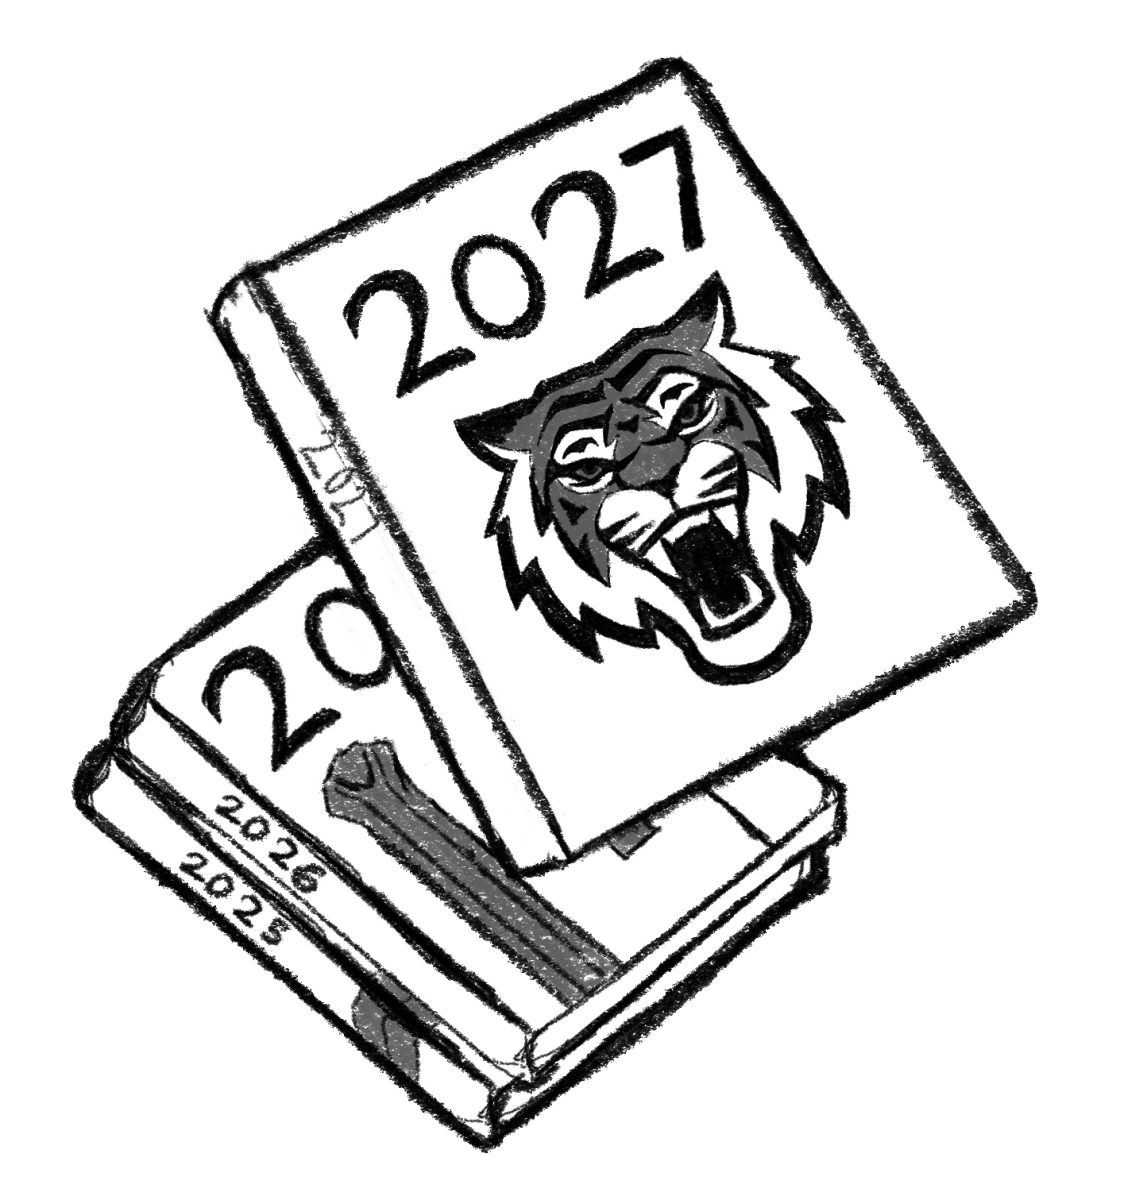 Illustration+of+a+future+2027+yearbook%2C+with+a+tiger%2C+as+well+as+two+previous+years+books.